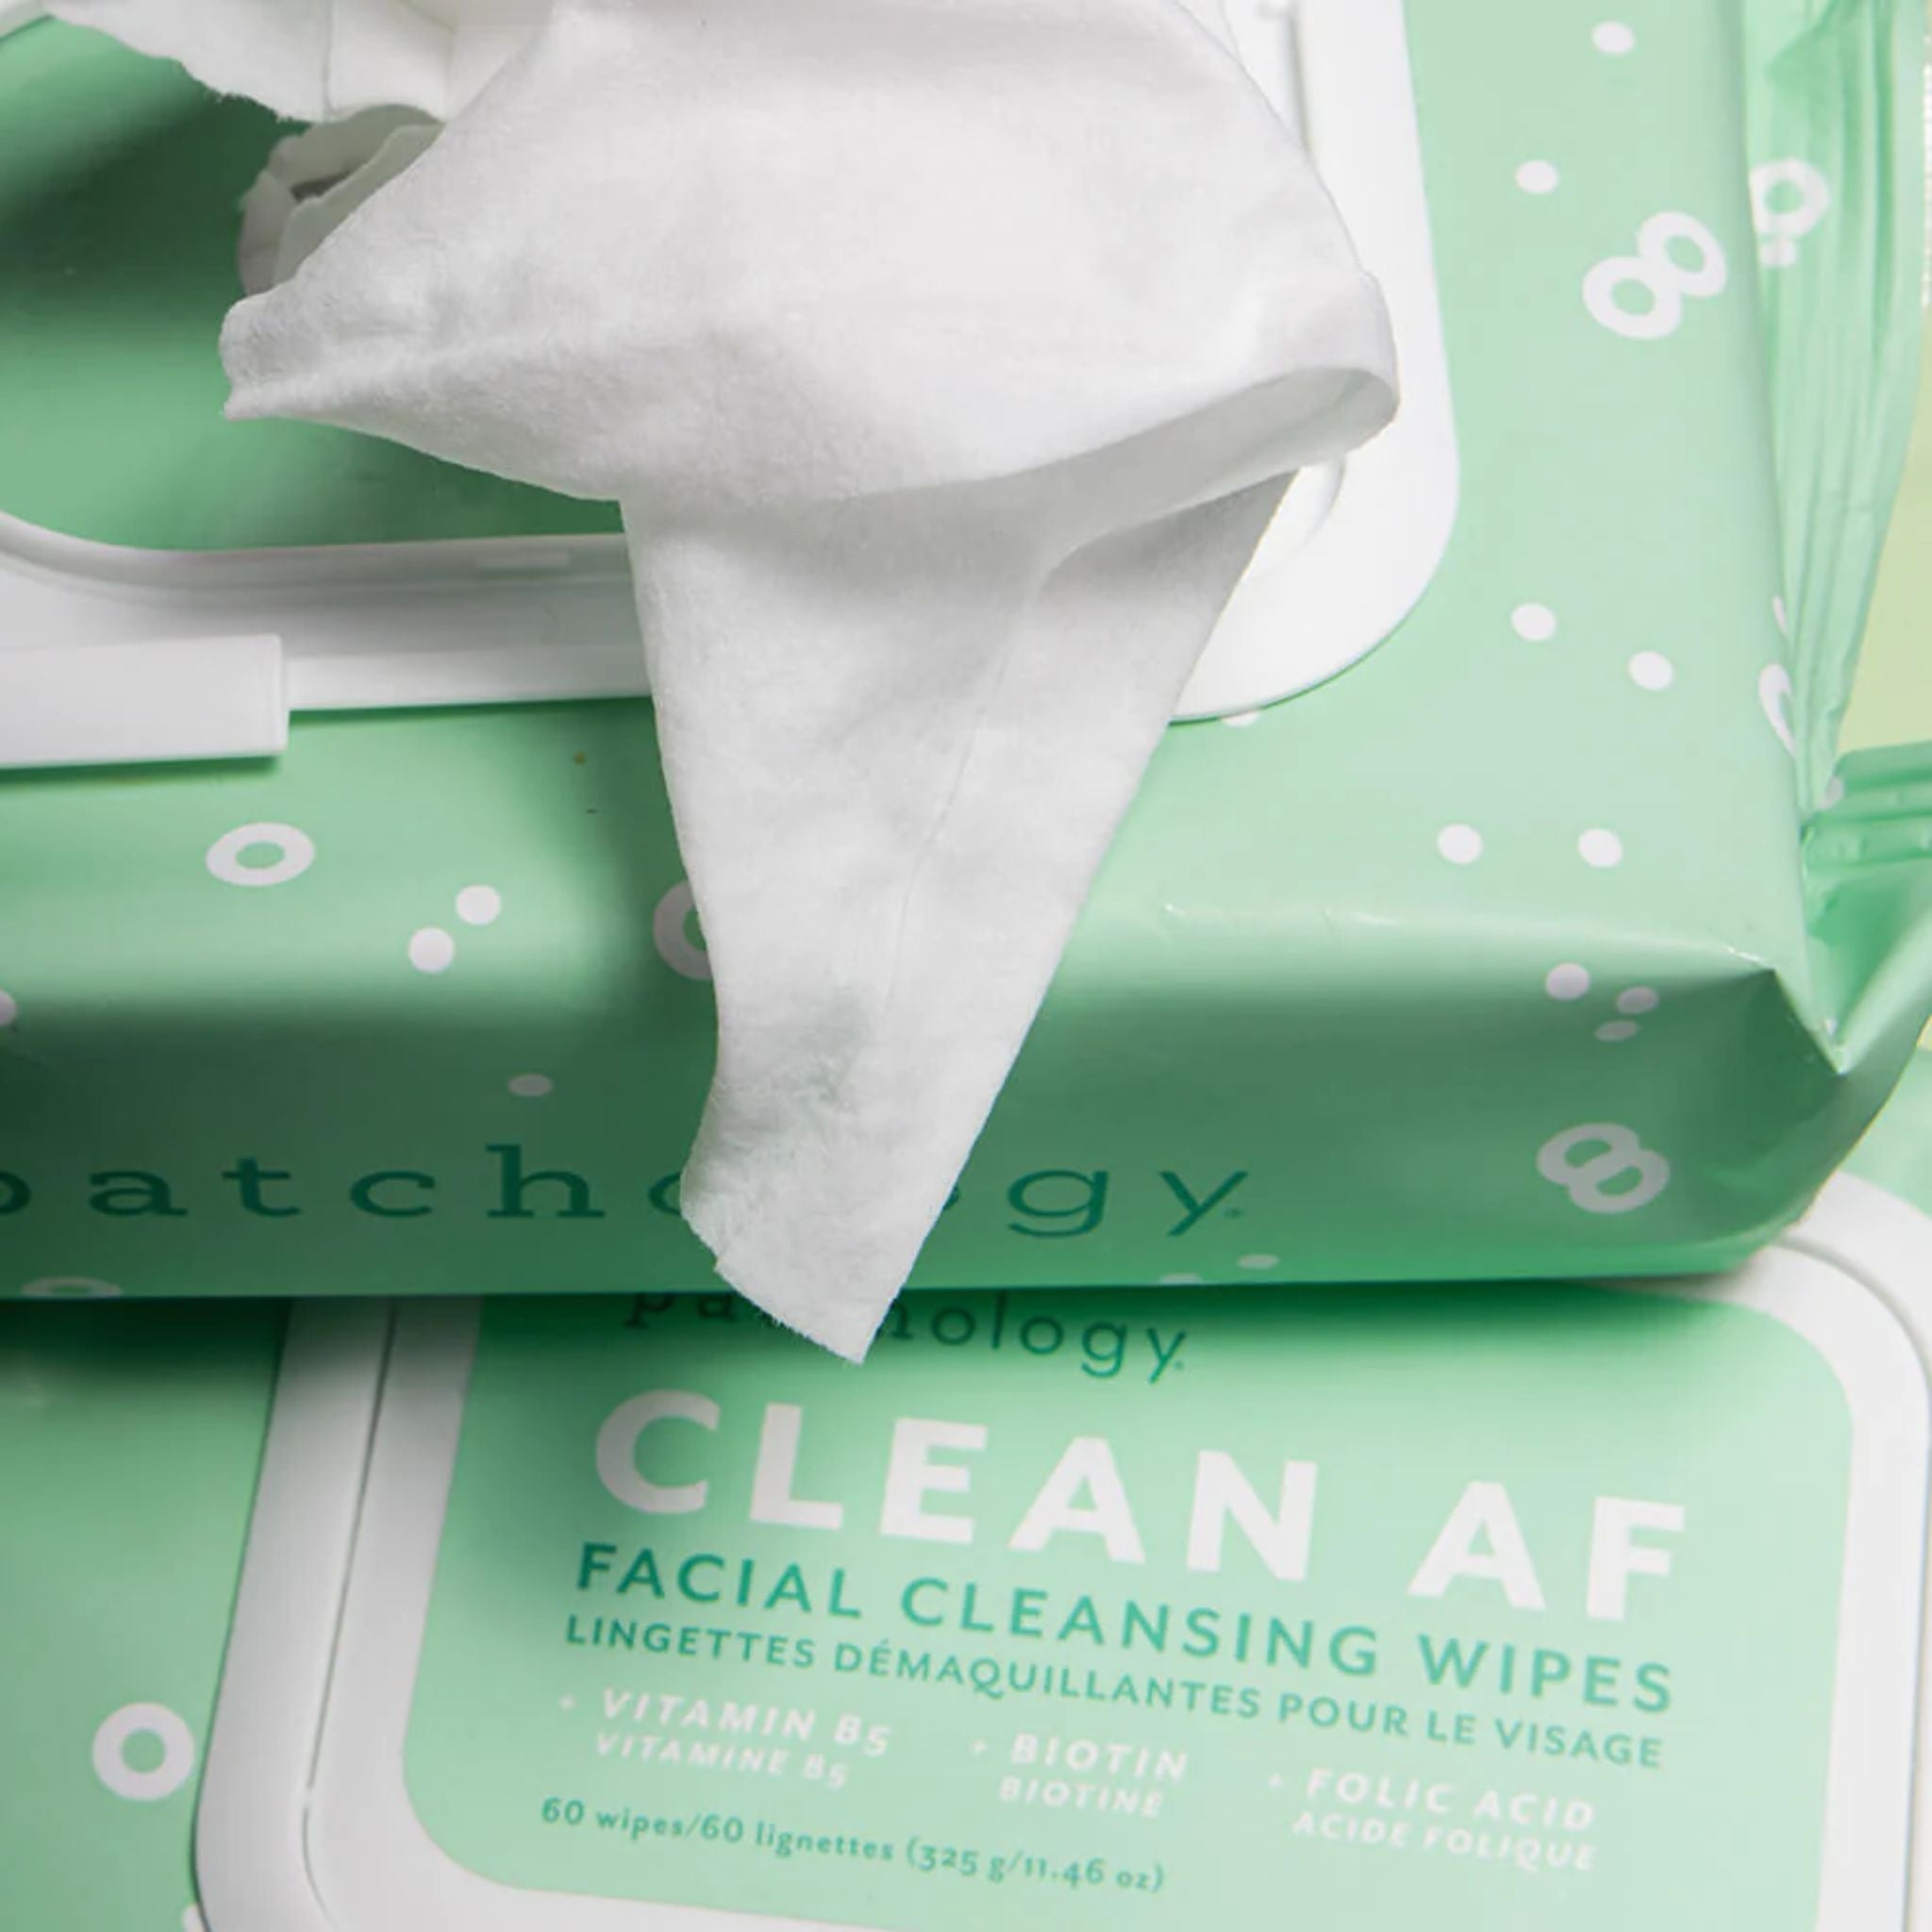 Patchology - Clean AF Facial Cleansing Wipes 60